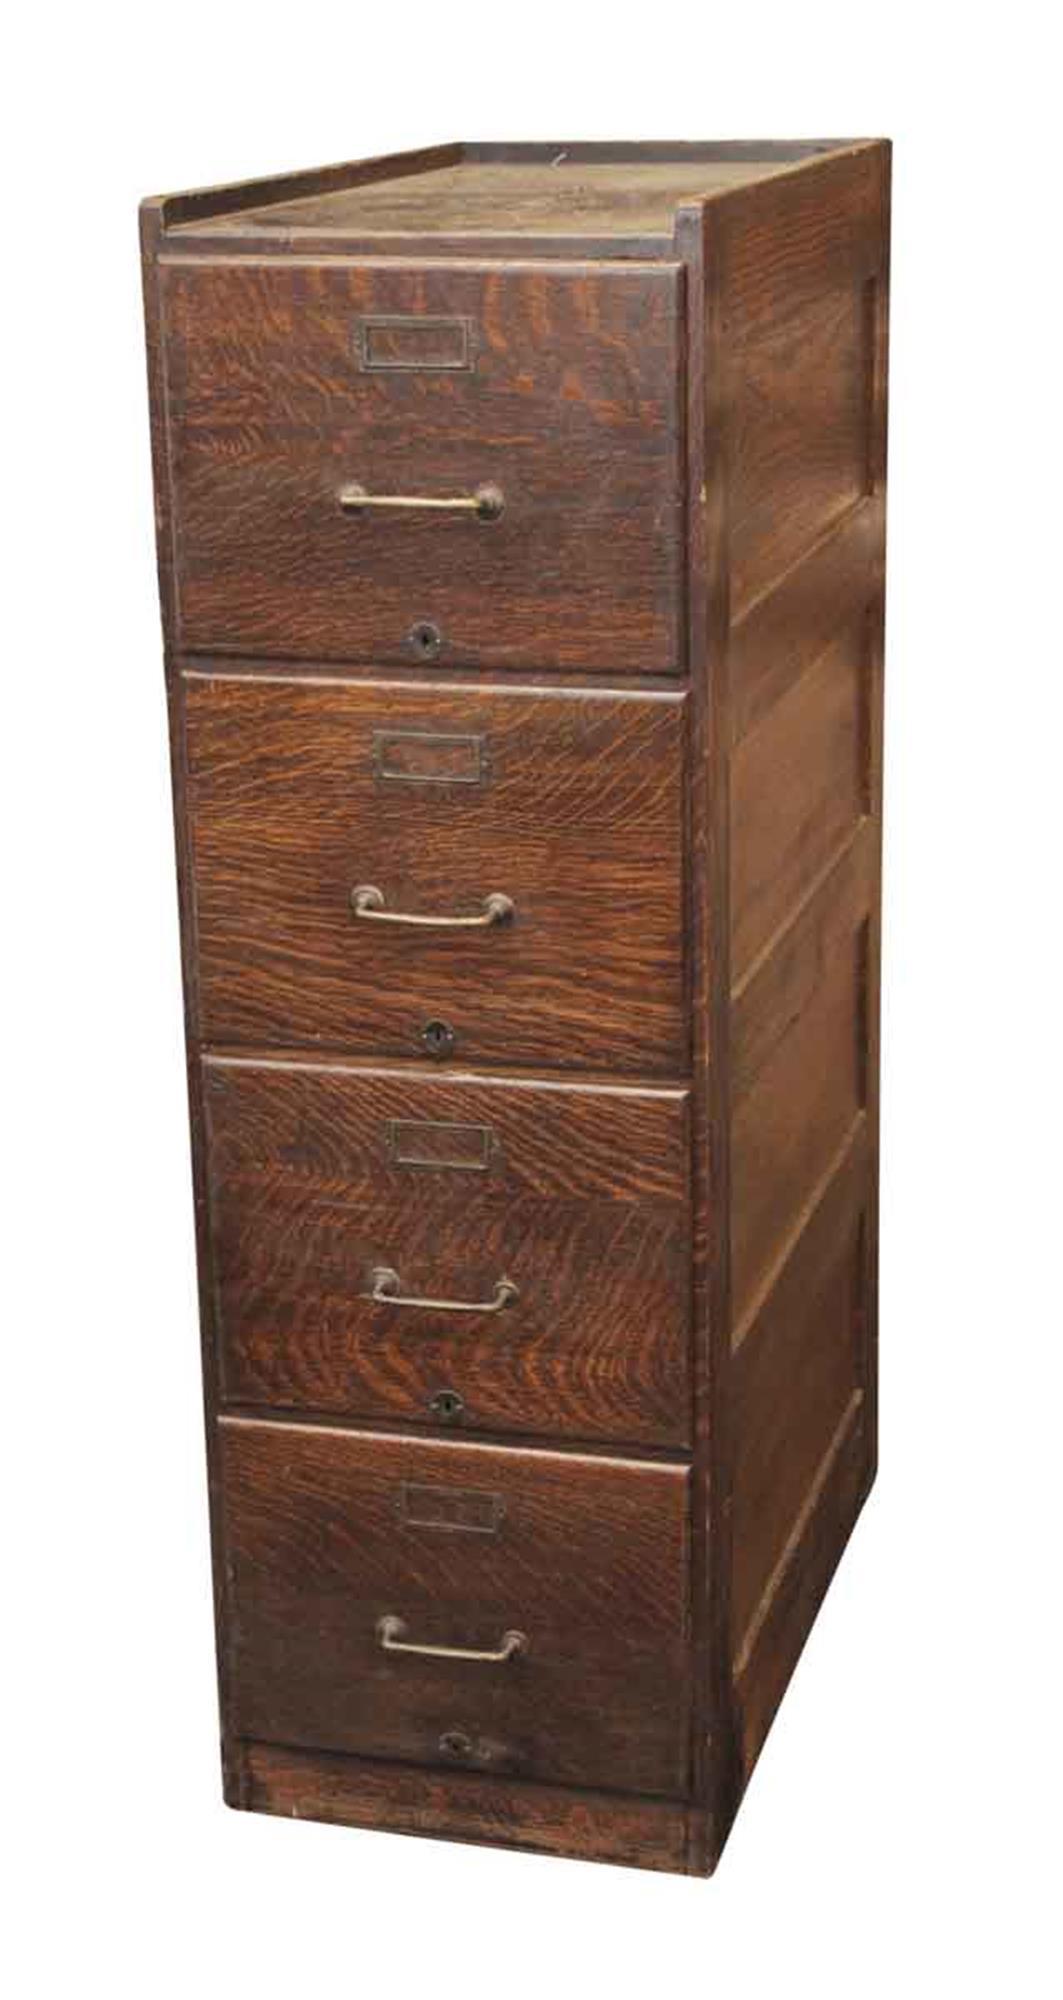 Quarter sawn oak file cabinet with recessed panels on both sides and letter sized drawers that go in and out freely, 1920s. This file cabinet has all original hardware and original finish. In excellent overall condition. This can be seen at our 302